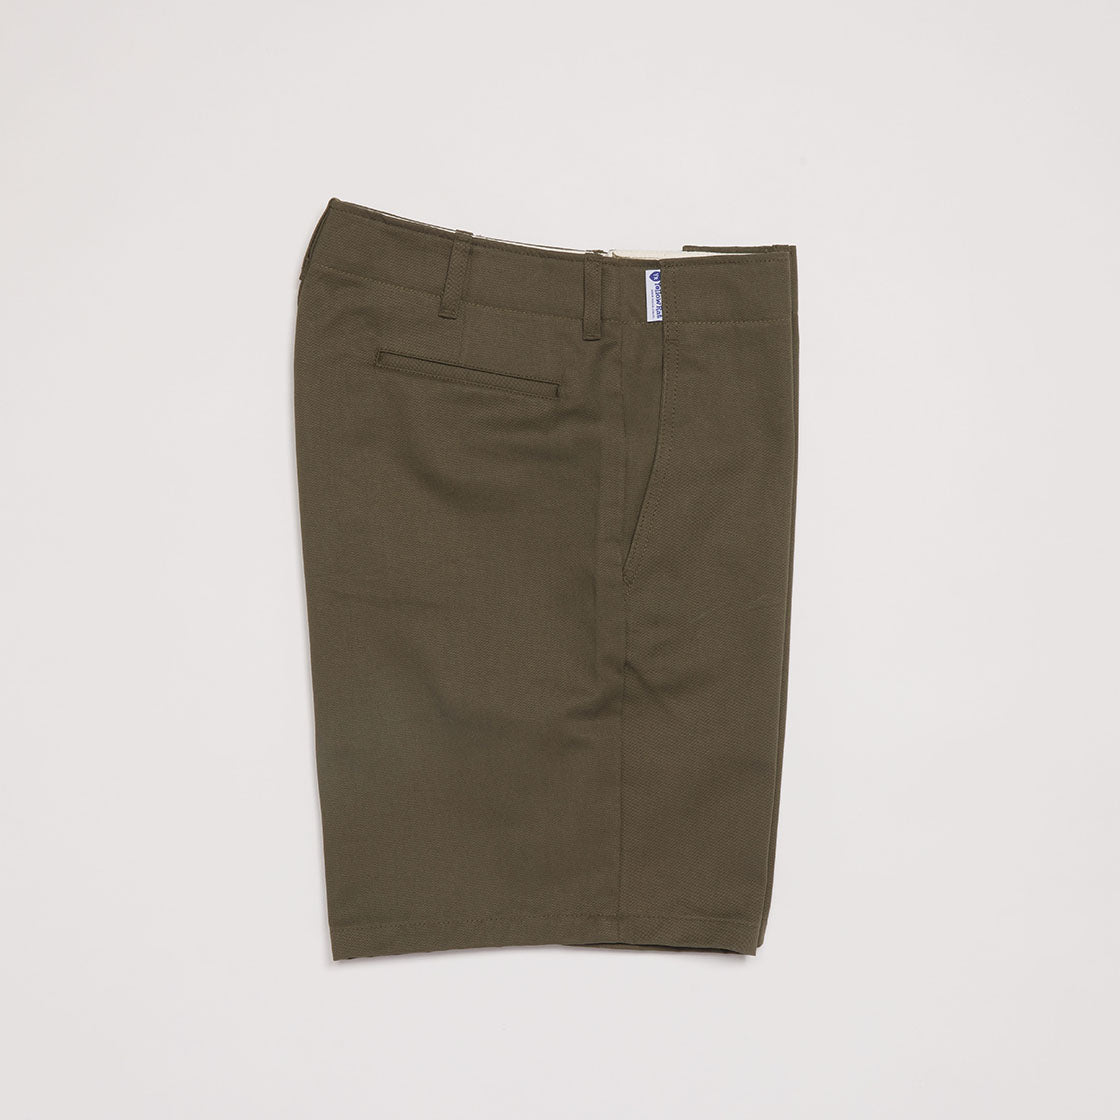 New Boy Scout Shorts (OD Green)